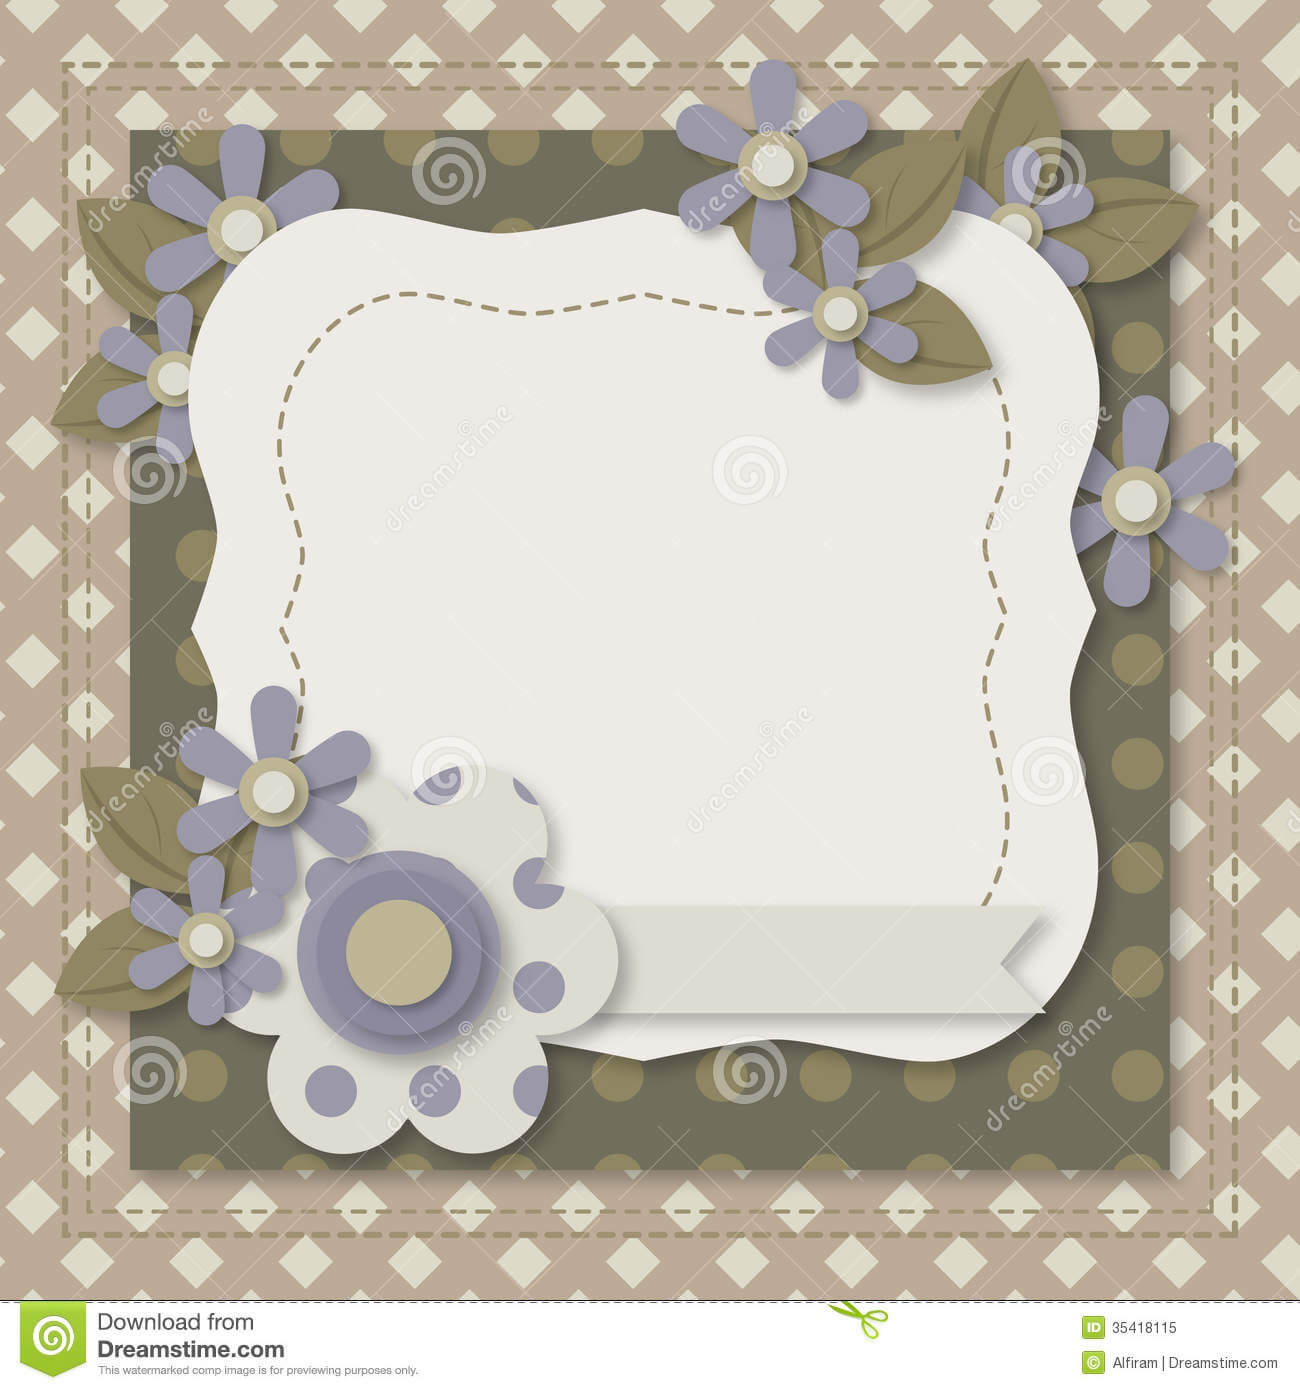 Template Of Greeting Card Or Album Page Stock Vector With Greeting Card Layout Templates